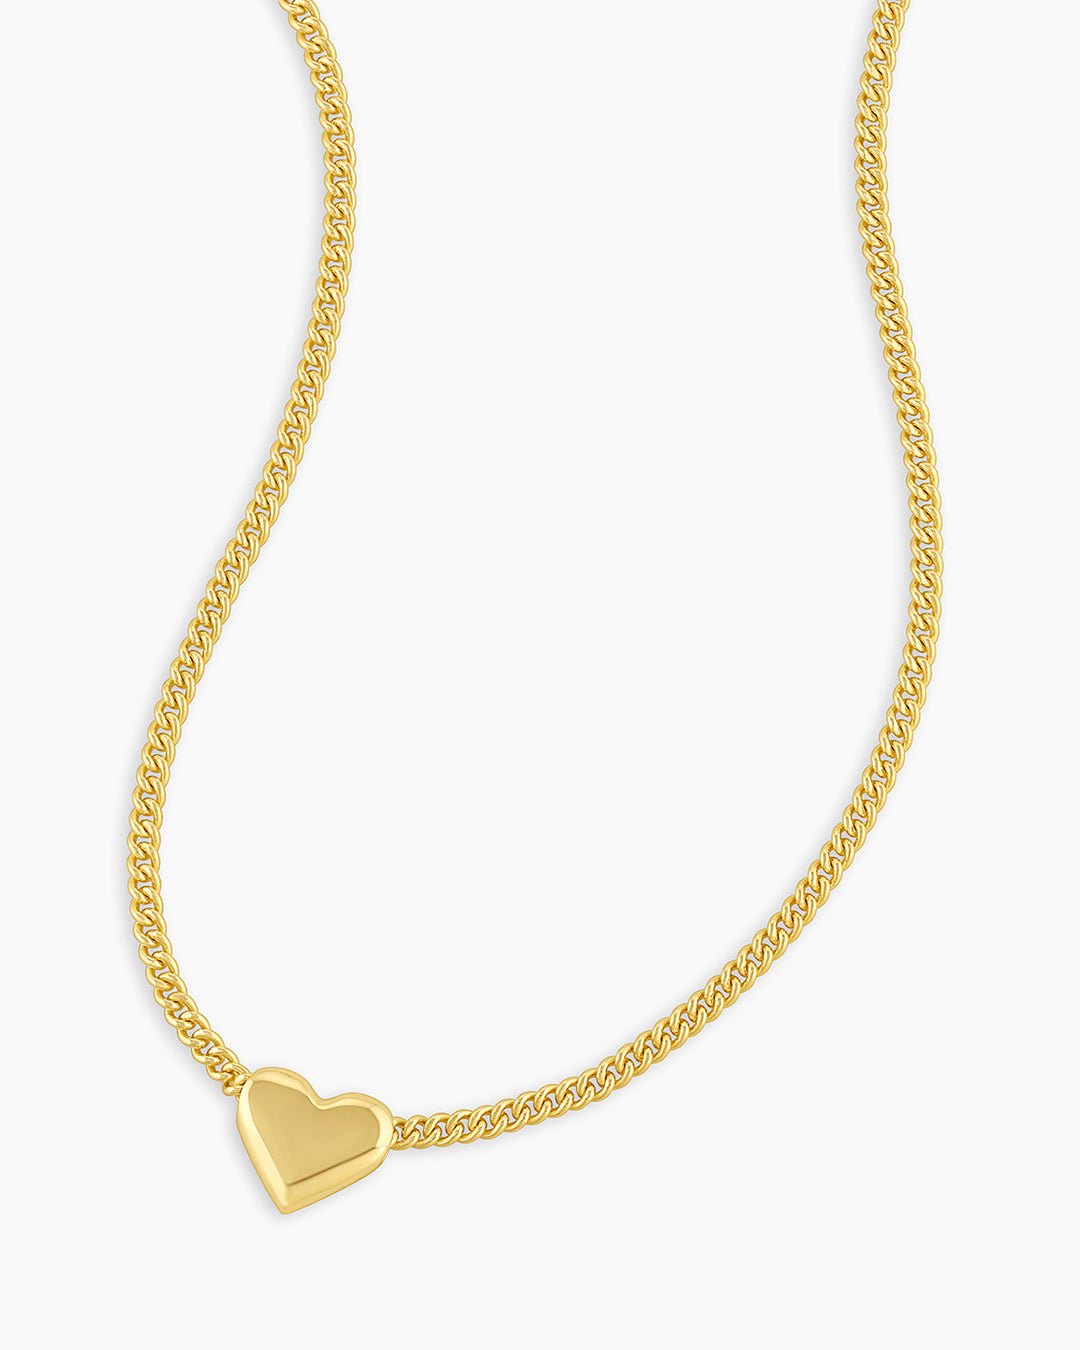 Lou Heart Charm Necklace || option::Gold Plated